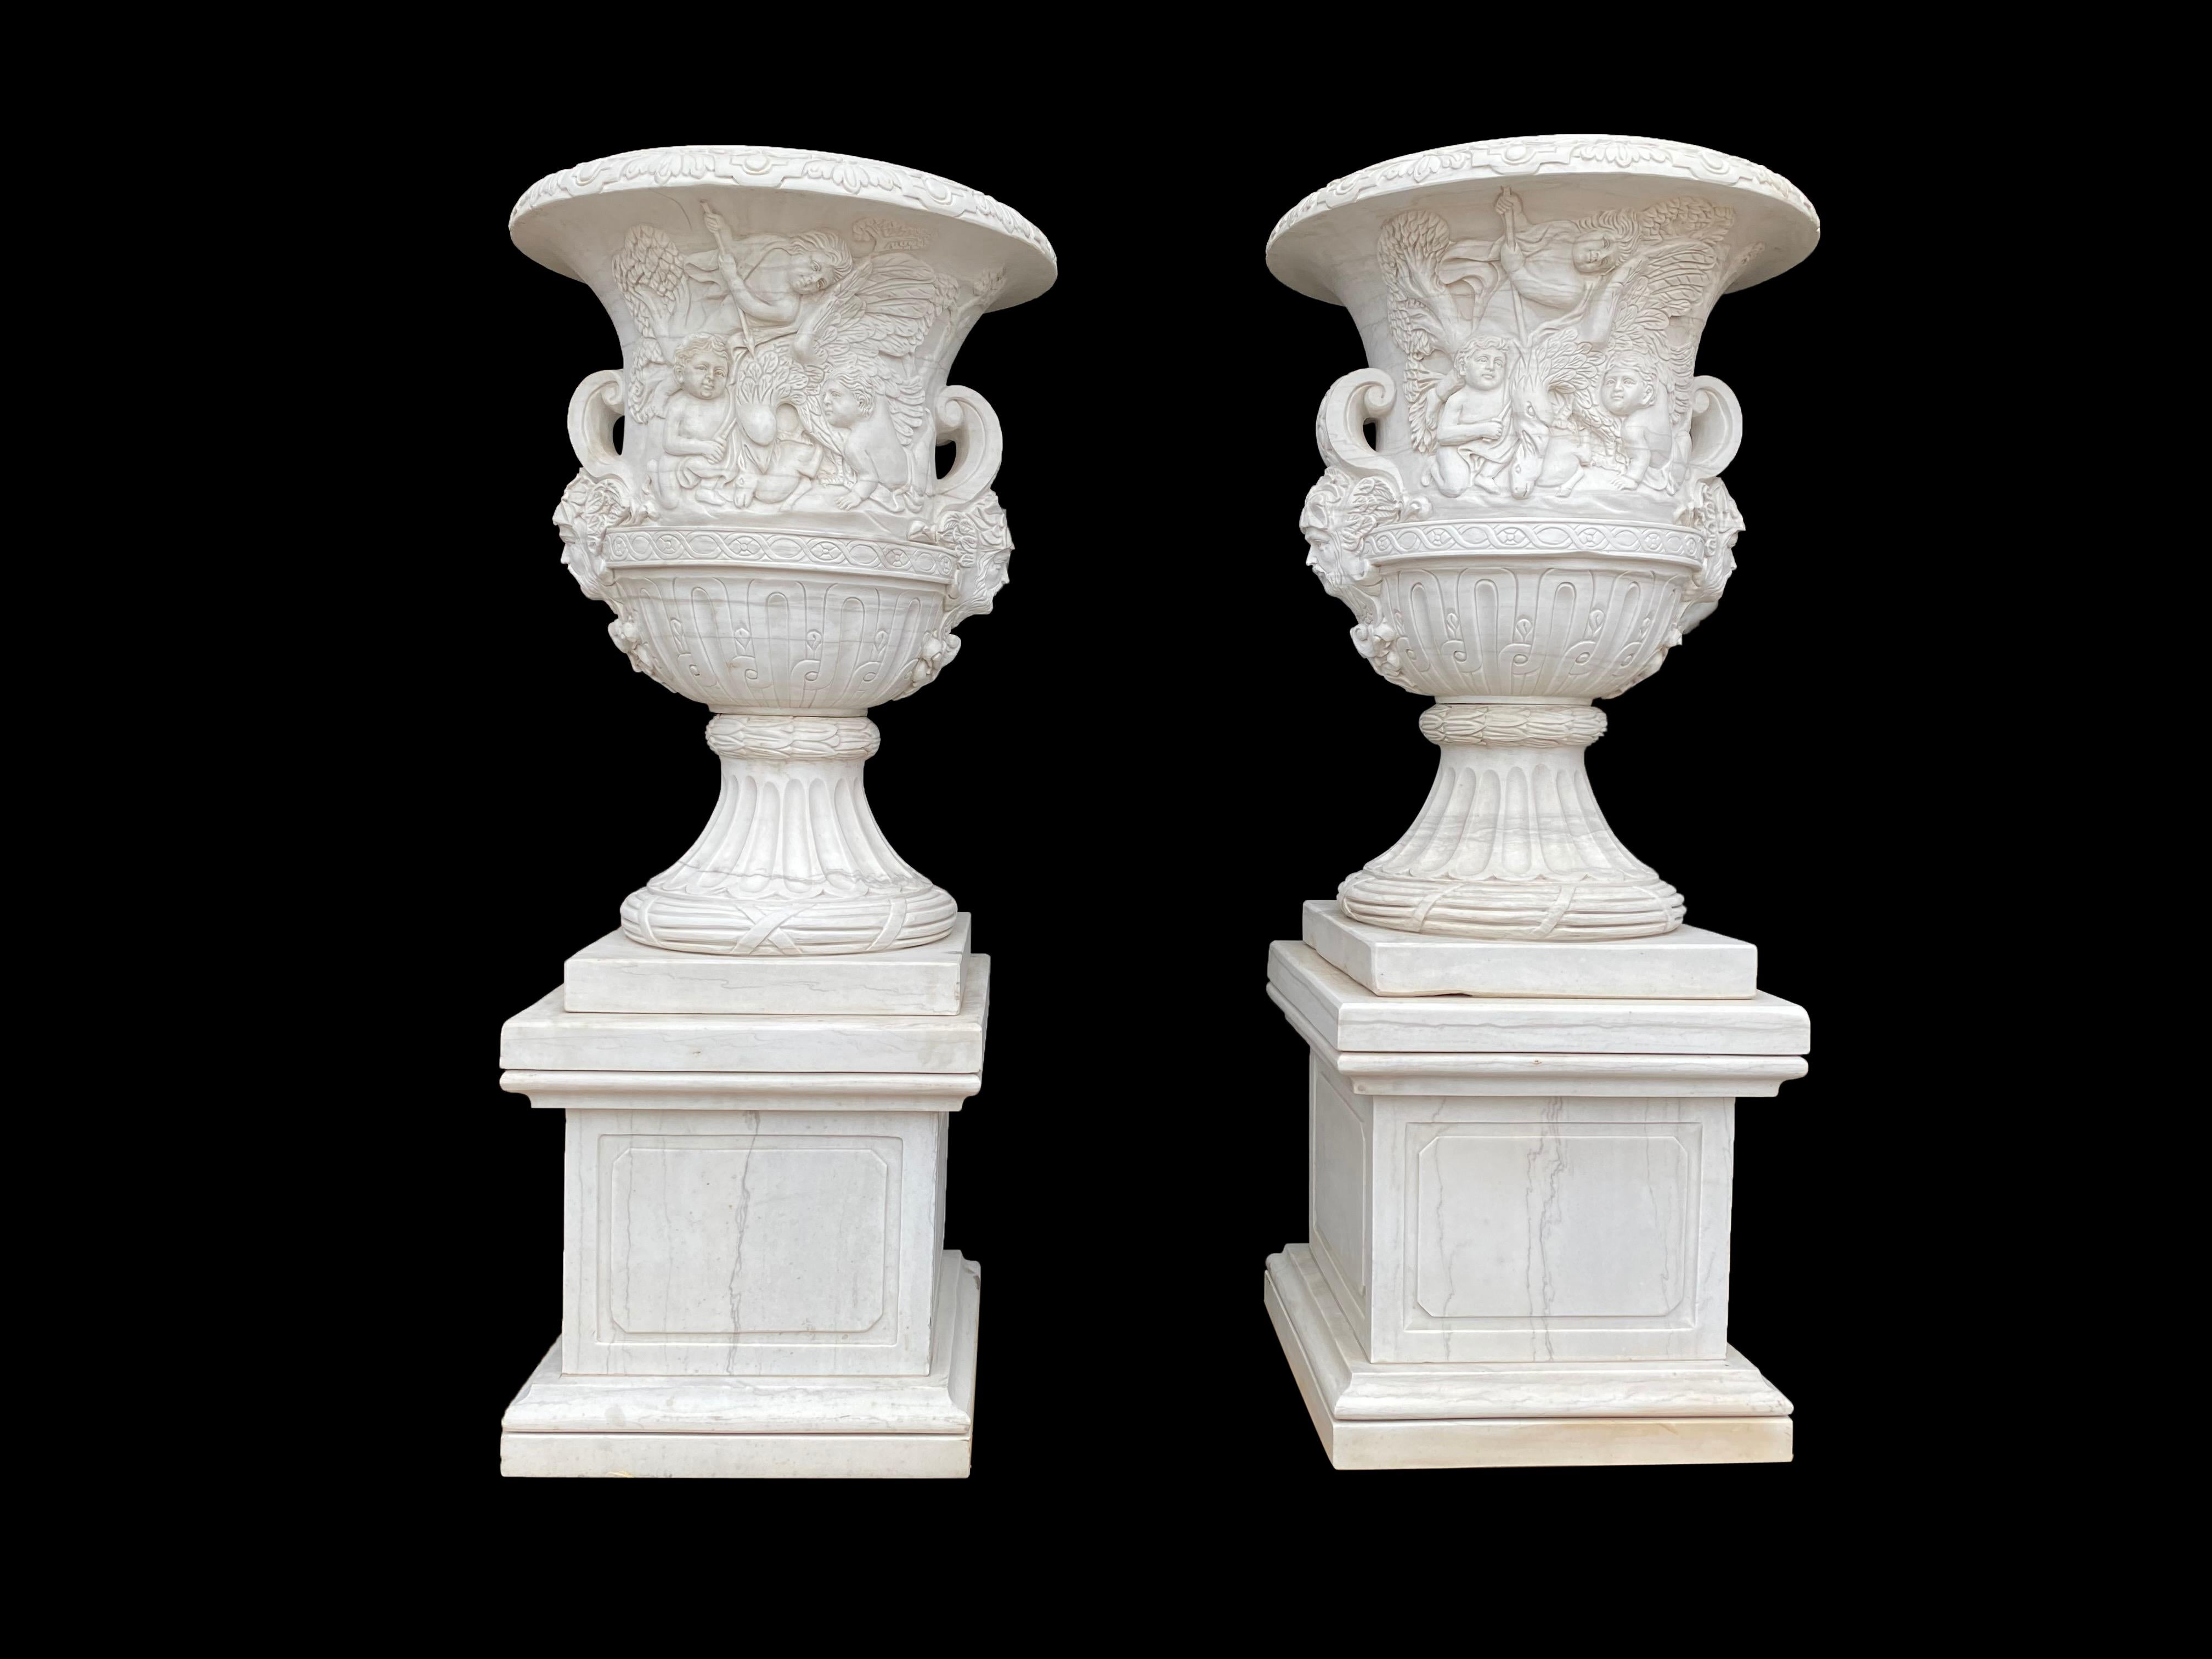 A beautiful pair of 21st century white marble large campana-form urns with figural friezes. The body with carved foliate scrolled decoration and mask handles, raised on square plinth bases, mounted on square pedestals. The pair have stunning carved